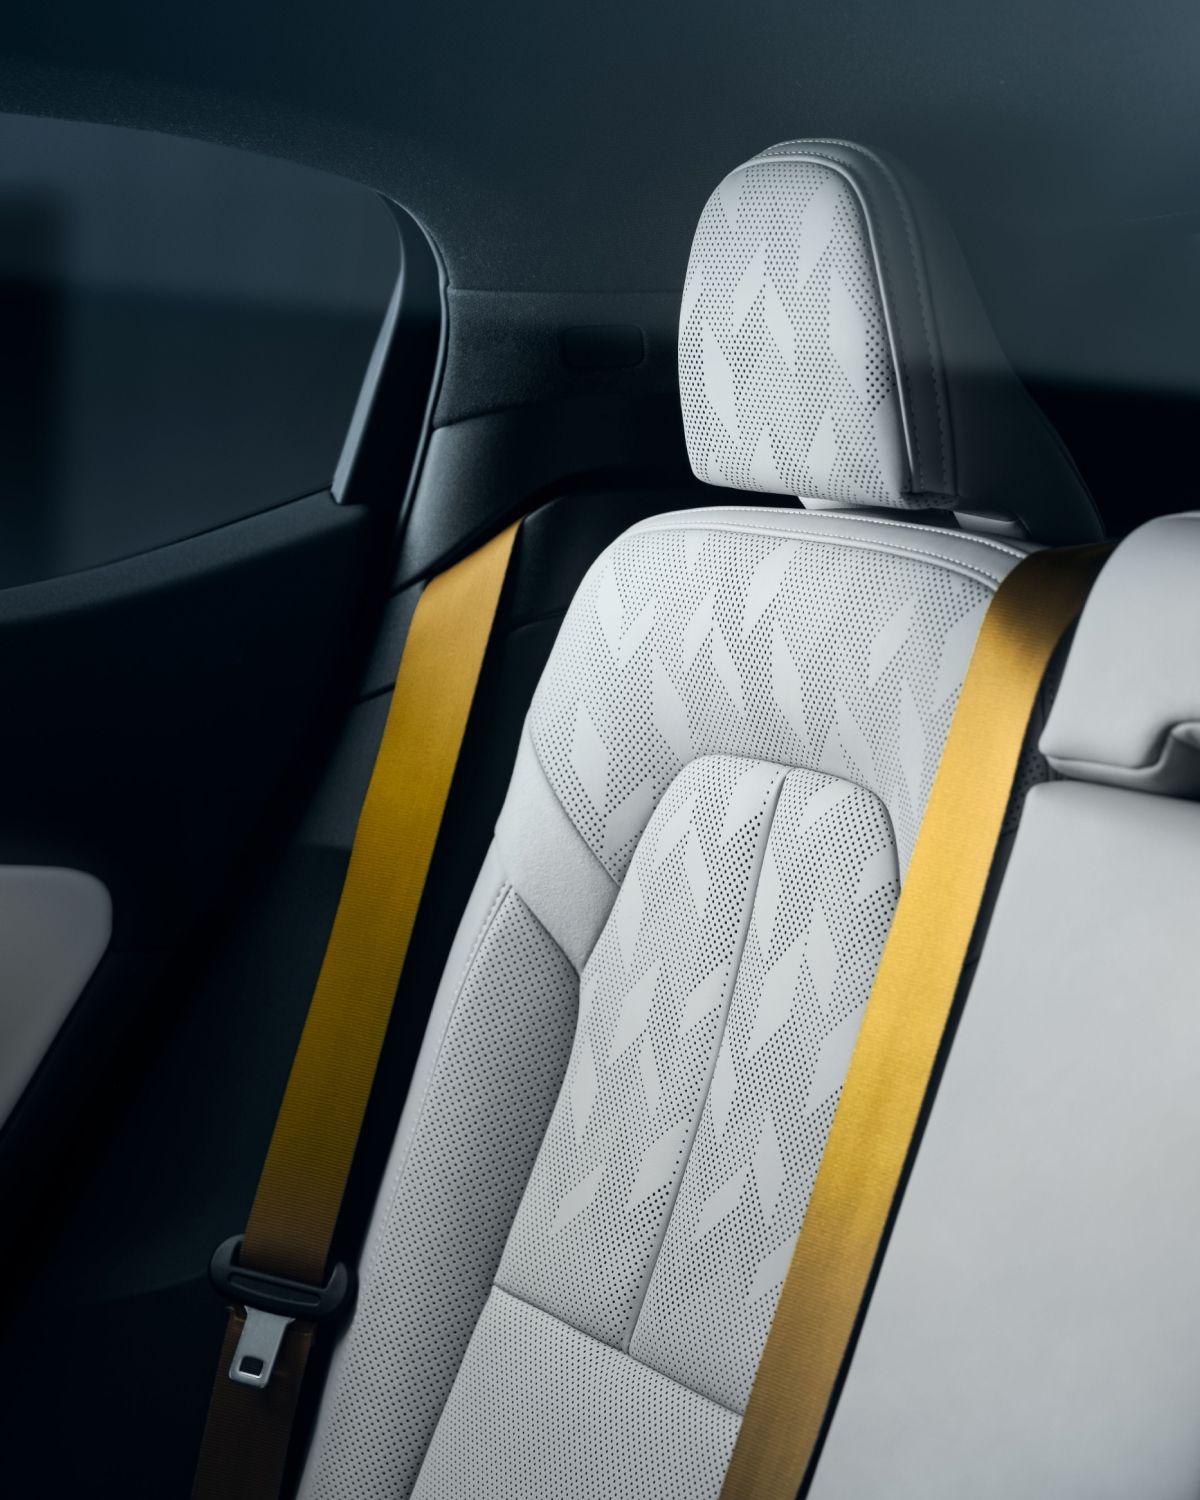 Backseat of the Polestar 2, light leather and yellow belts